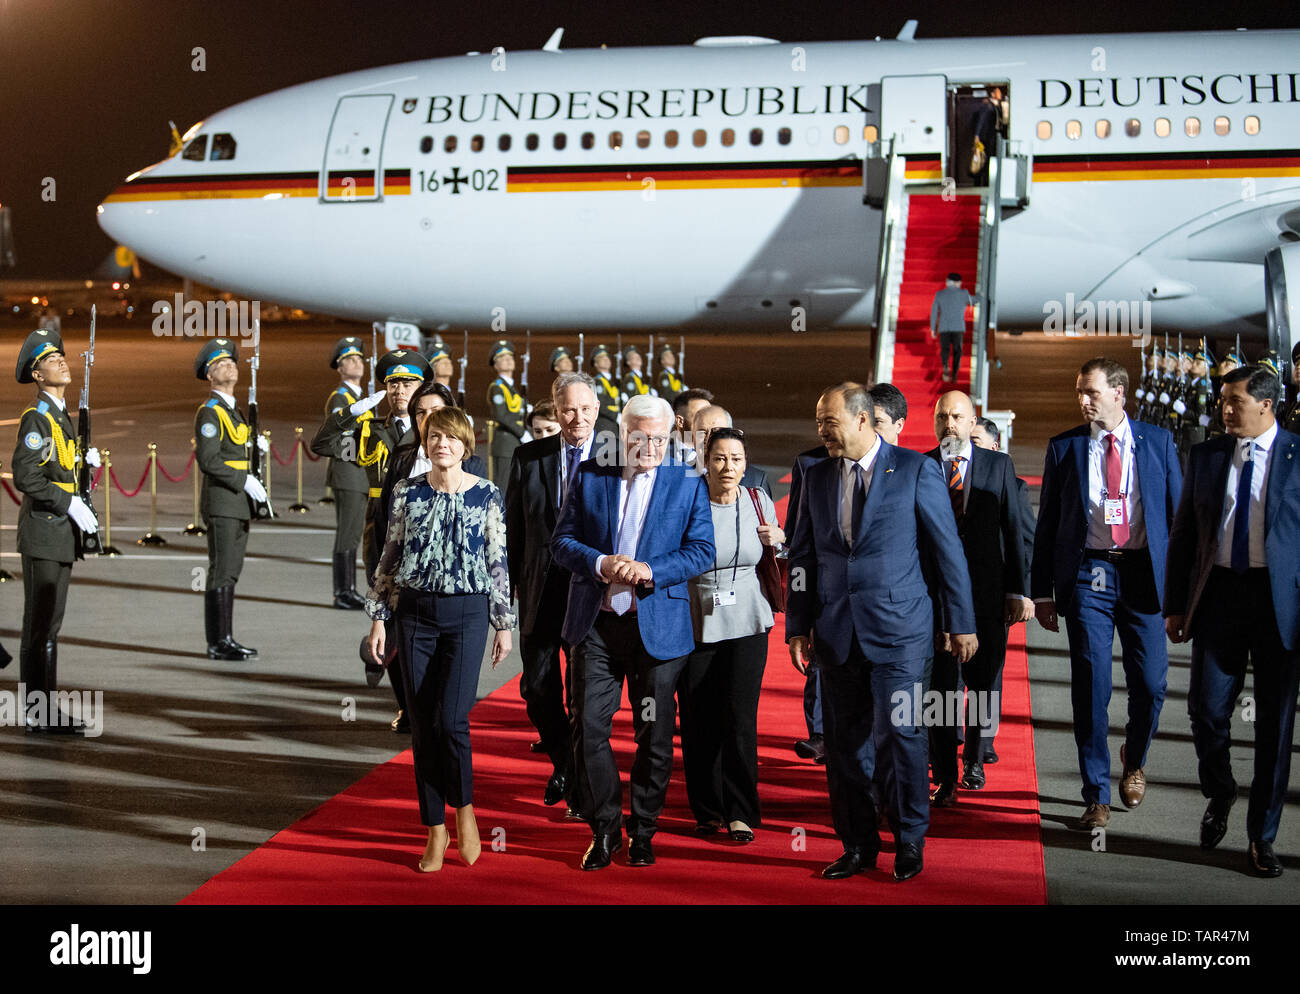 Taschkent, Uzbekistan. 27th May, 2019. President Frank-Walter Steinmeier (in front M) and his wife Elke Büdenbender arrive at Yushny International Tashkent Airport and are welcomed by Abdulla Aripow (r), Prime Minister of Uzbekistan. President Steinmeier and his wife are on a two-day state visit to Uzbekistan. They are accompanied by numerous business representatives and cultural workers. Credit: Bernd von Jutrczenka/dpa/Alamy Live News Stock Photo